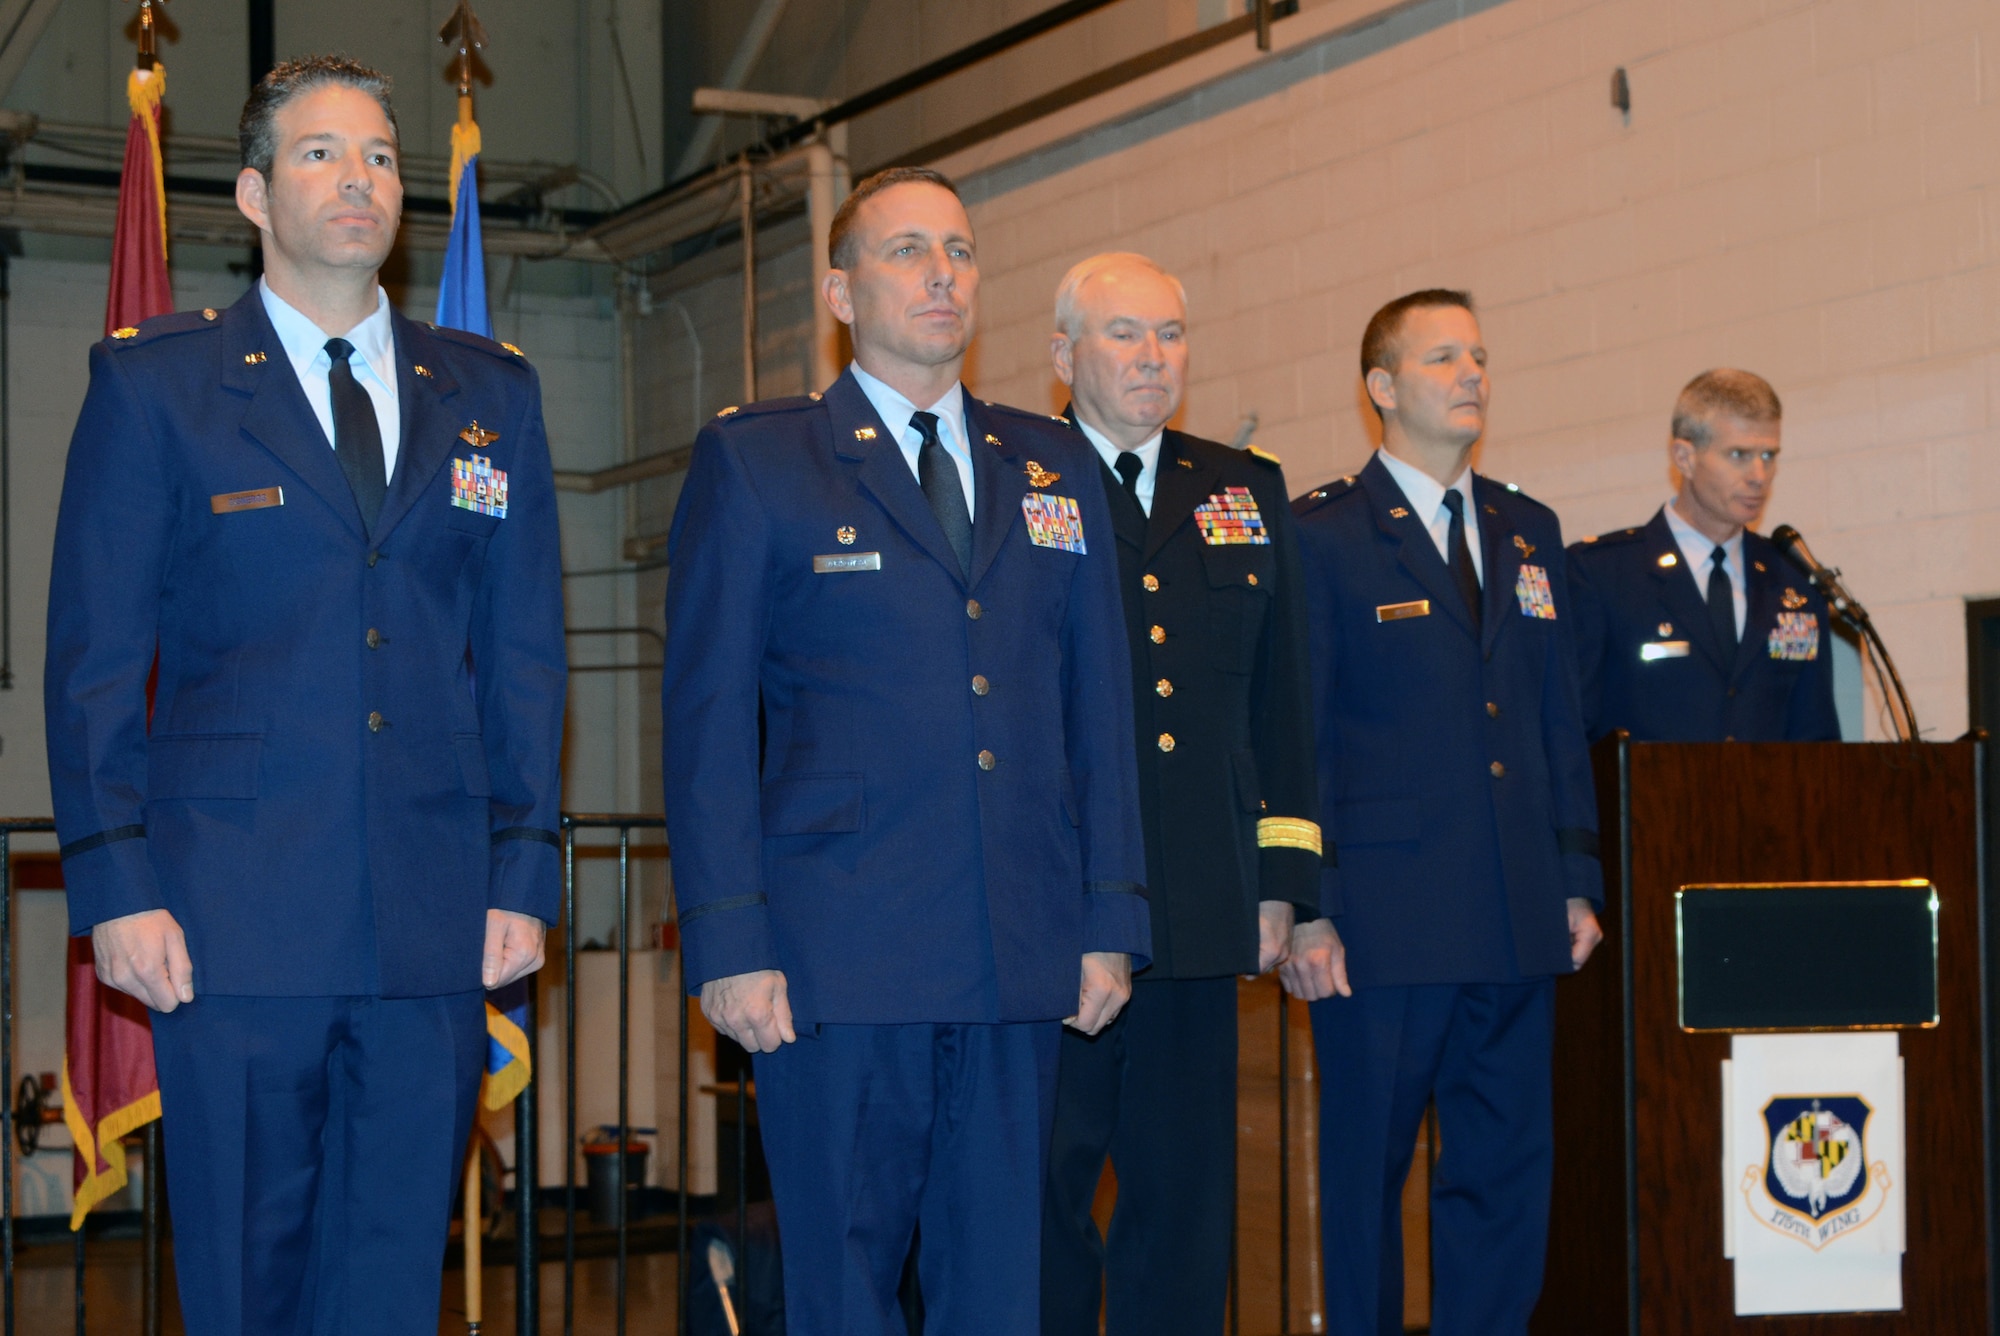 Maj. Chris Cisneros (left) and Lt. Col. Paul C. Zurkowski stand at the position of attention during an awards ceremony Dec. 8, 2013, at Warfield Air National Guard Base, Md. They were awarded the Distinguished Flying Cross with Valor for their actions in a fire fight while deployed to Afghanistan. Cisneros and Zurkowski are A-10C Thunderbolt II pilots with the Maryland Air National Guard’s 104th Fighter Squadron. (U.S. Air National Guard photo/Tech Sgt. David Speicher)